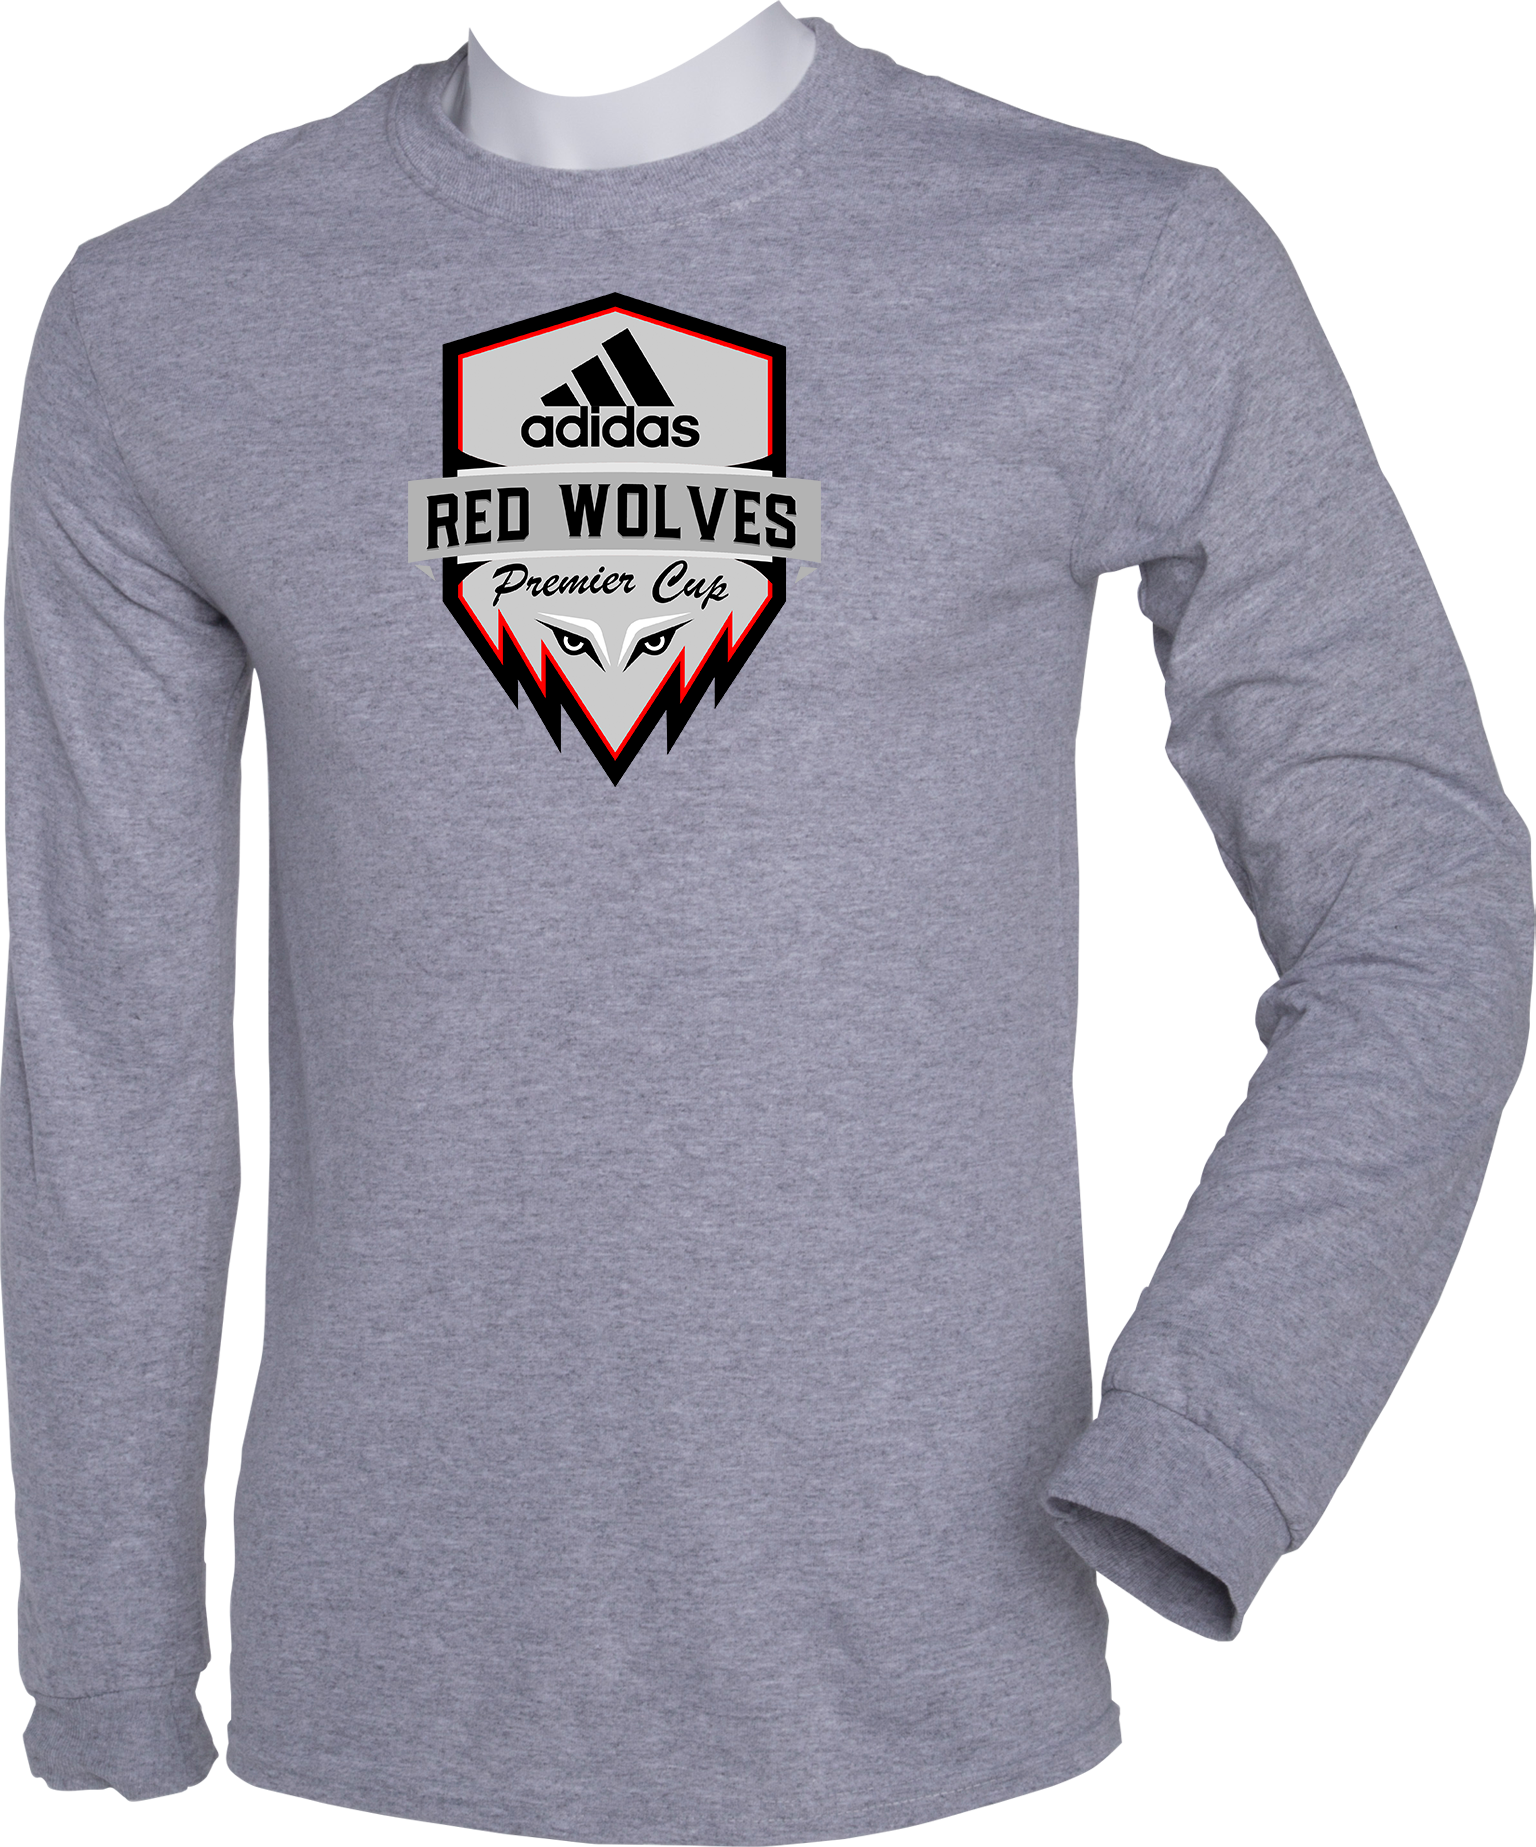 LONG SLEEVES - 2023 Adidas Red Wolves Premier Cup